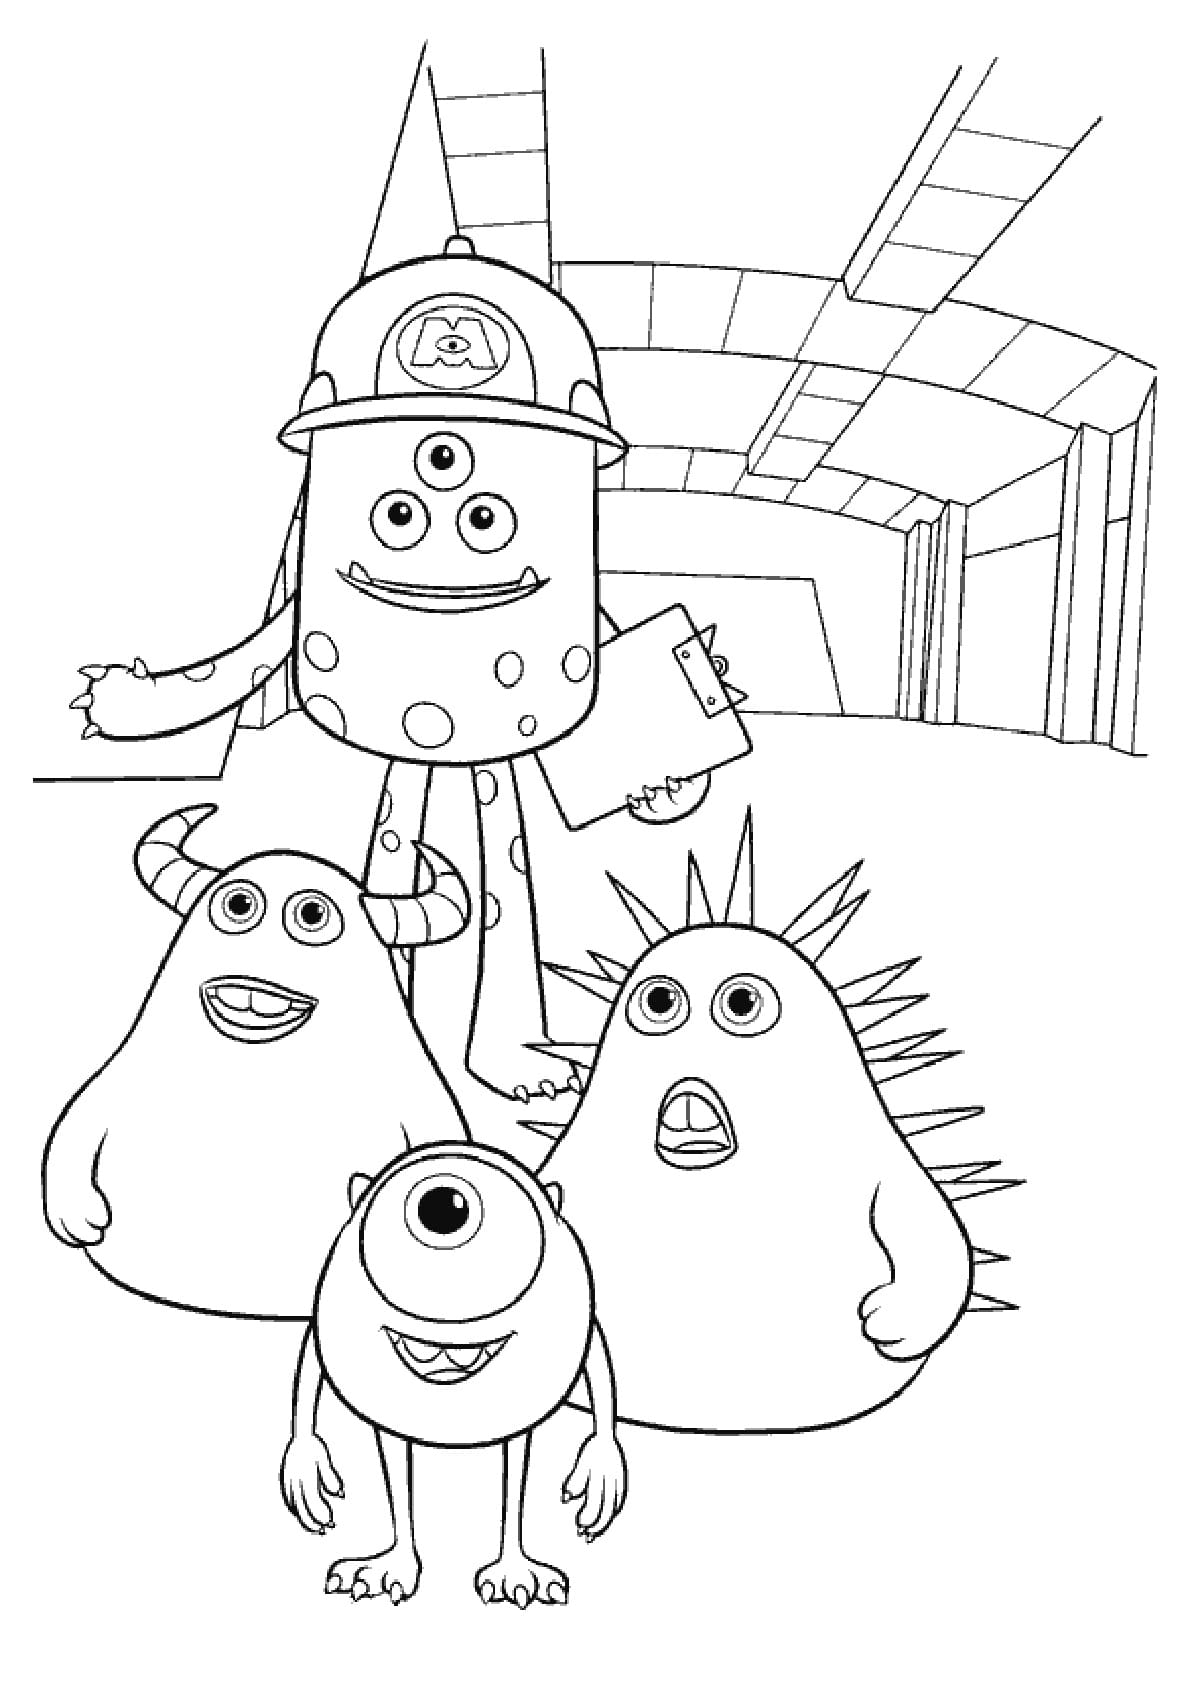 Monsters Inc Coloring Pages Free Monsters Inc Coloring Pages Best